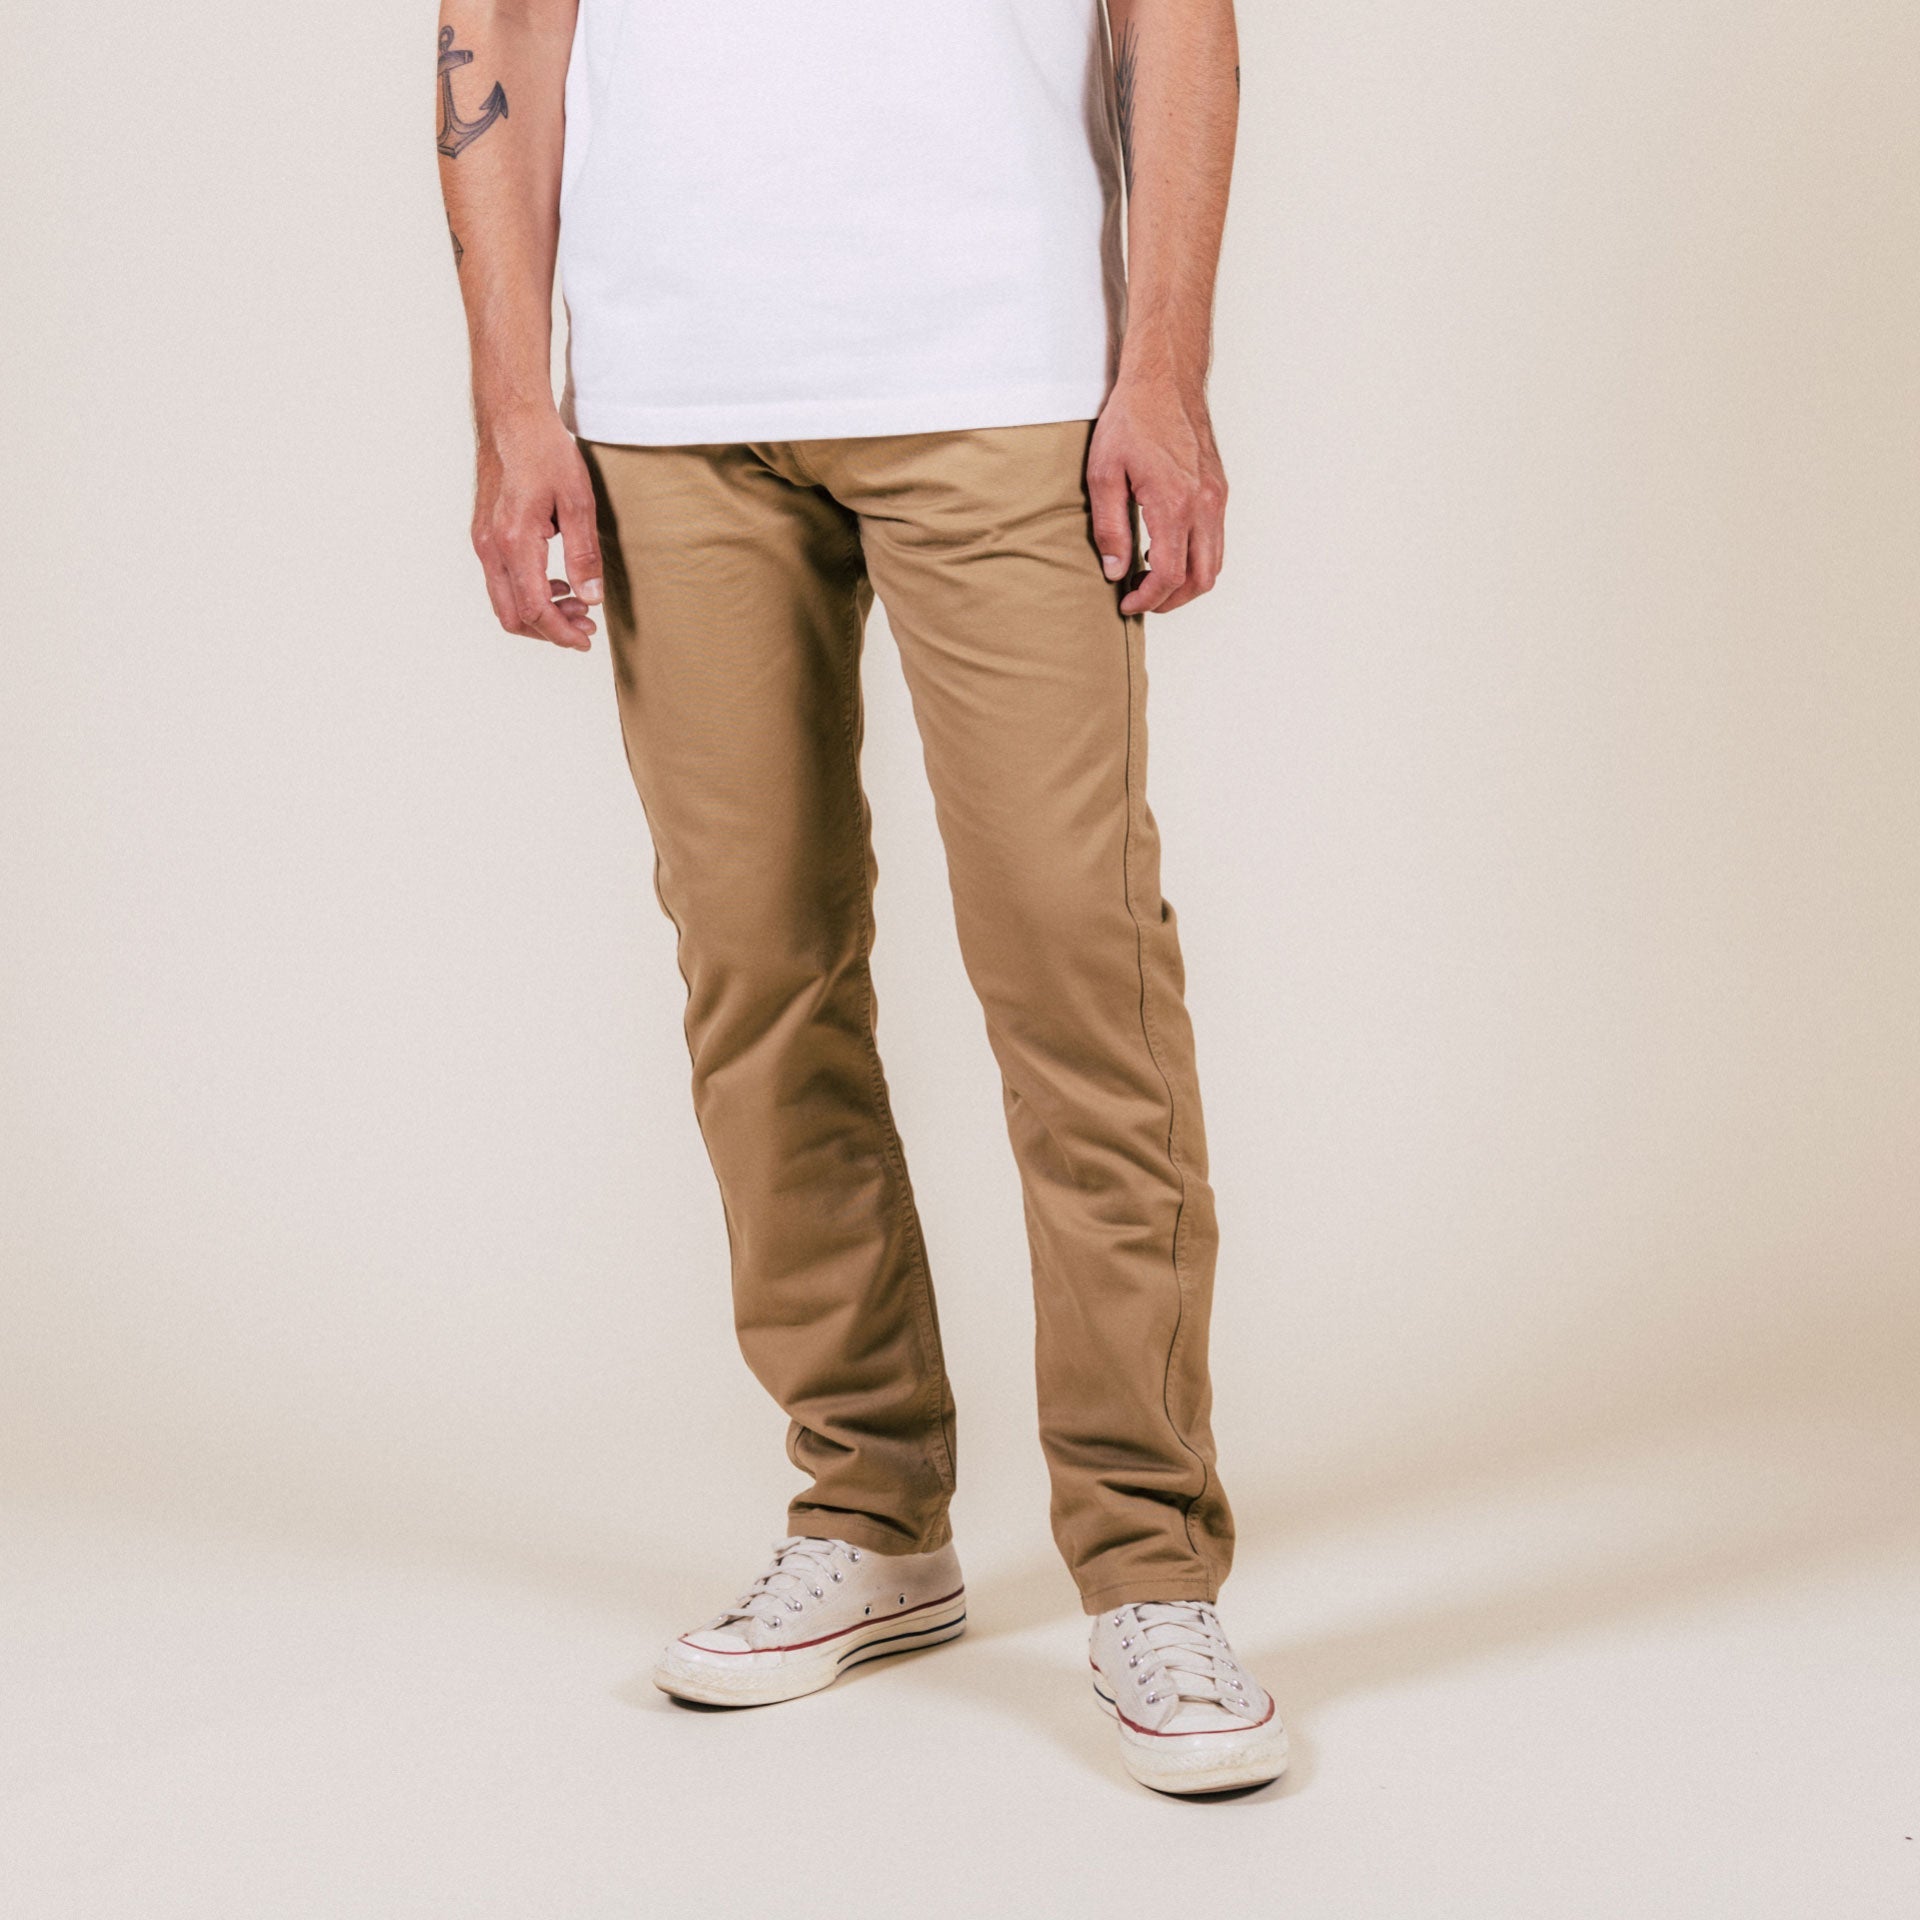 CCS Original Relaxed Chino Pants - Leopard